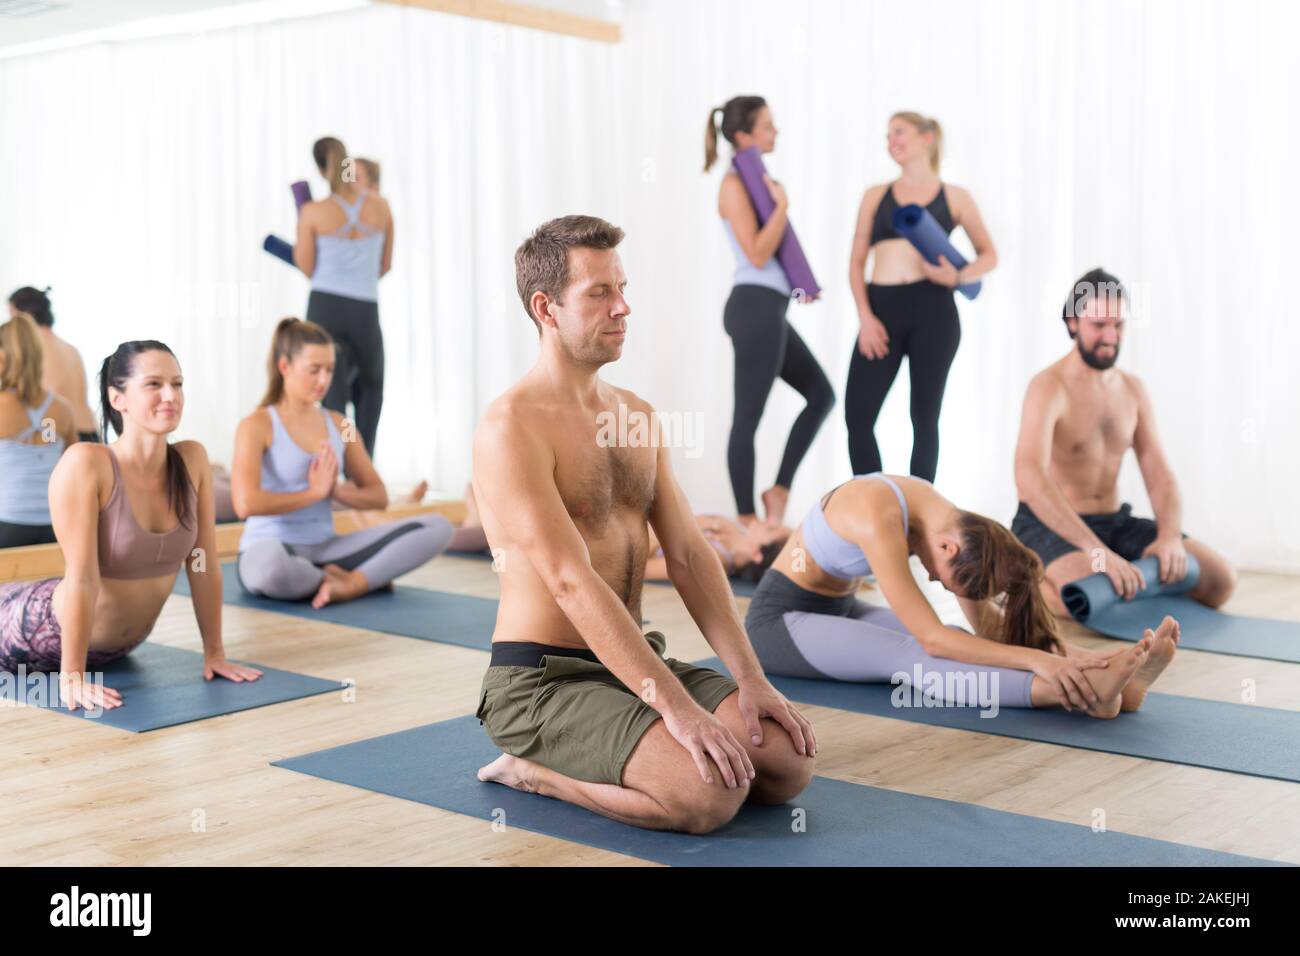 Group of young sporty attractive people in yoga studio, relaxing and socializing after hot yoga class. Healthy active lifestyle, working out in gym. Stock Photo